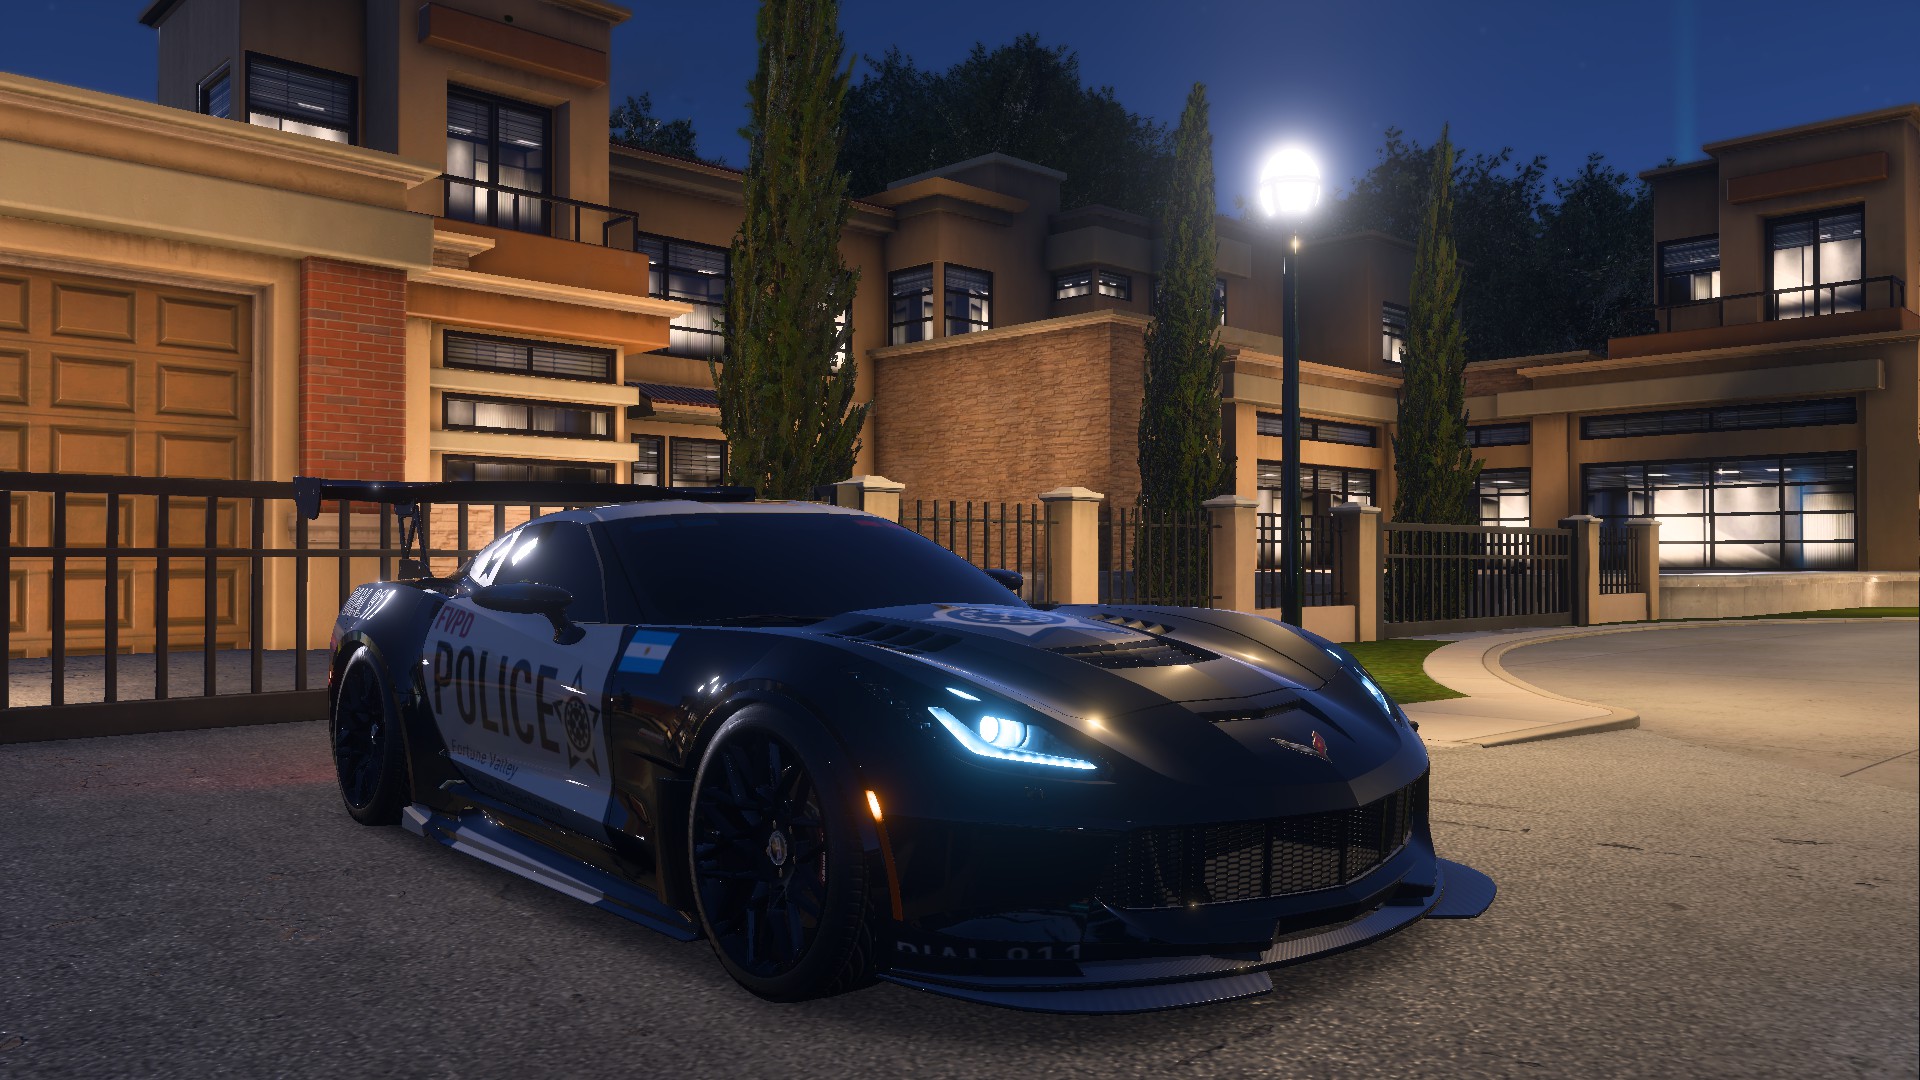 Need For Speed Need For Speed Payback Car Police Cars Chevrolet Corvette Grand Sport Chevrolet Corve 1920x1080